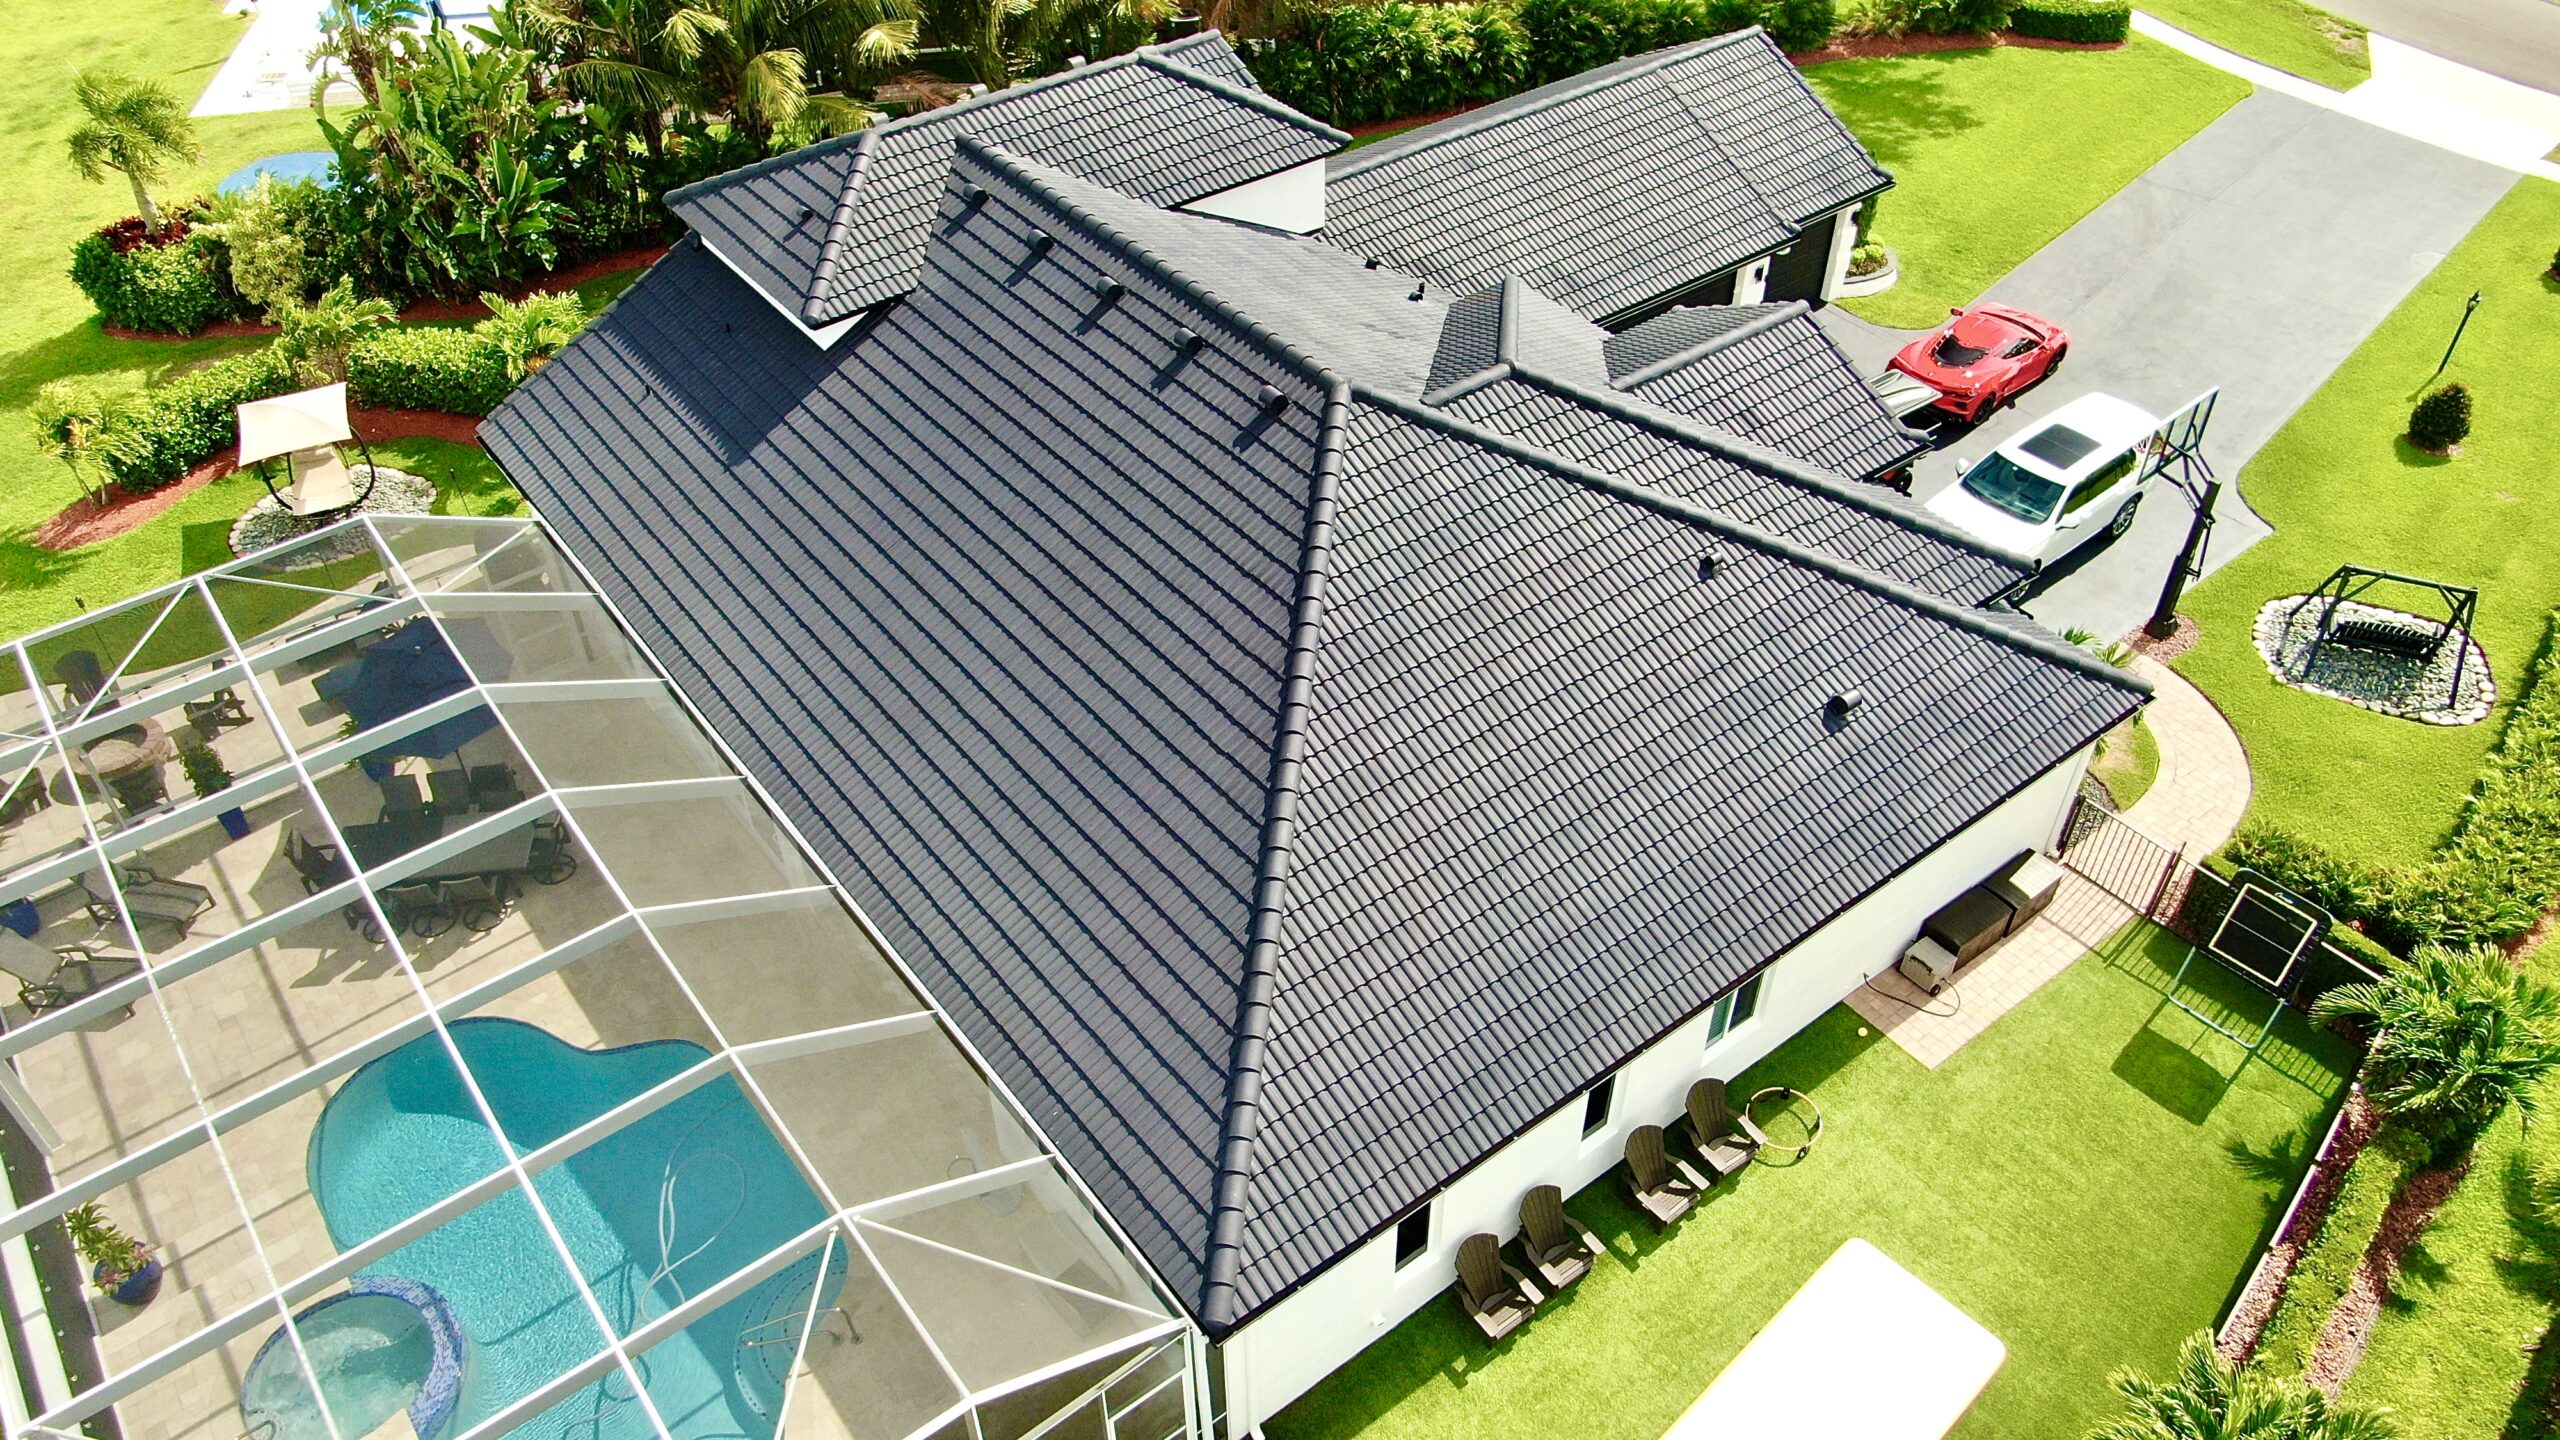 #1 Roofing Company West Palm Beach, Florida | Roofing Contractor West Palm Beach